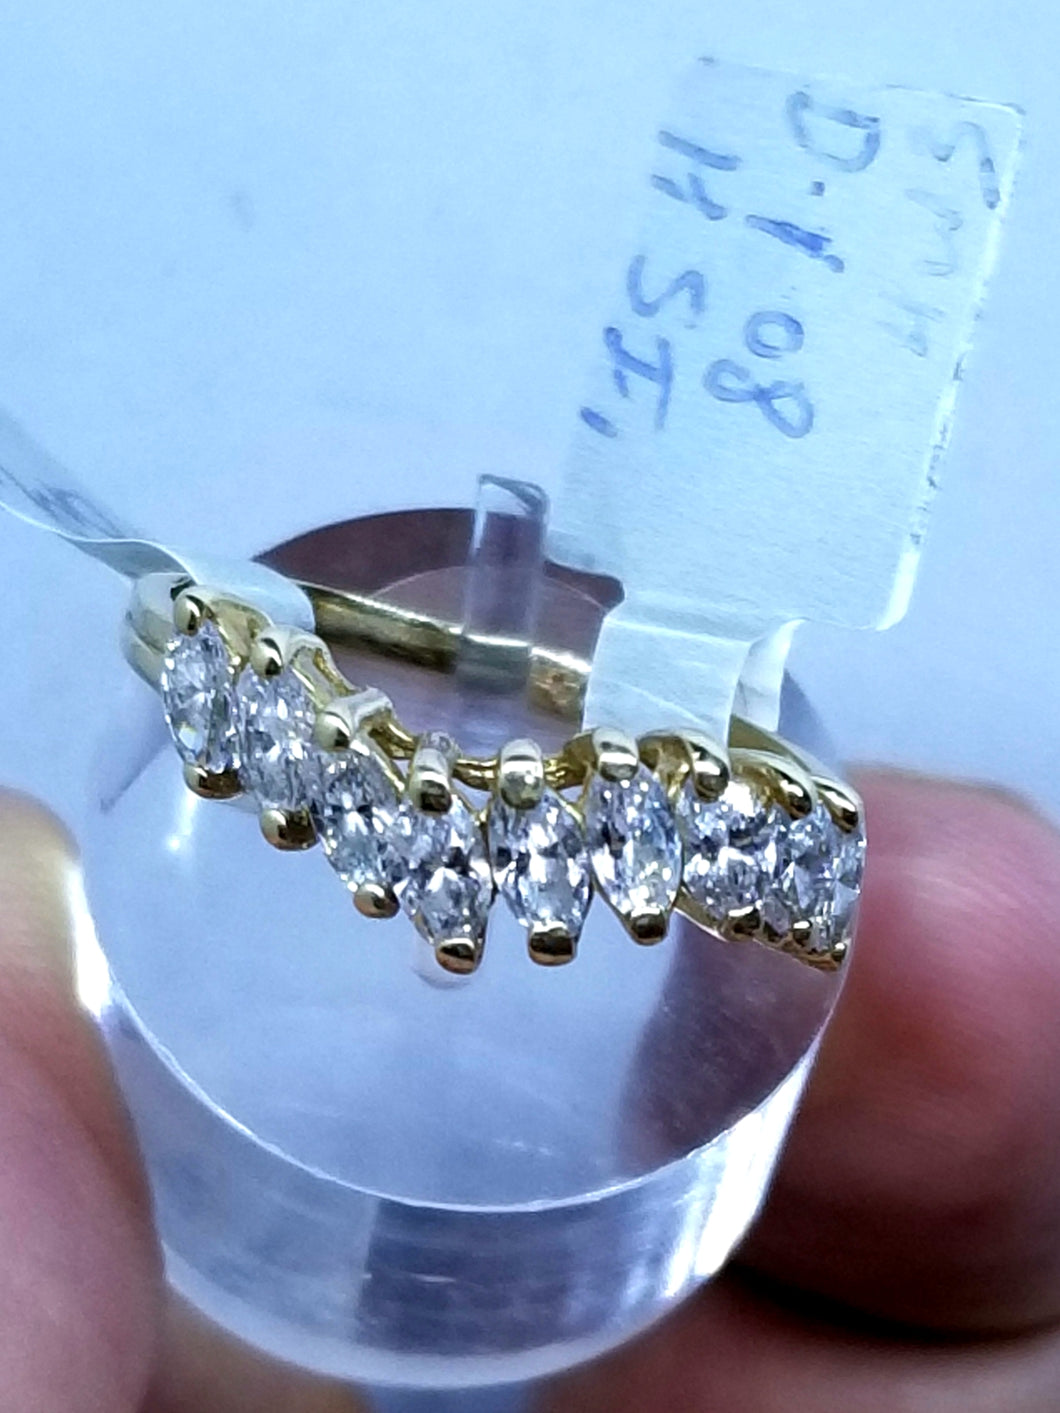 100% Natural mine real 1.08 Carat Diamond Ring,14K 2.8gr Yellow Gold, Size 7.75